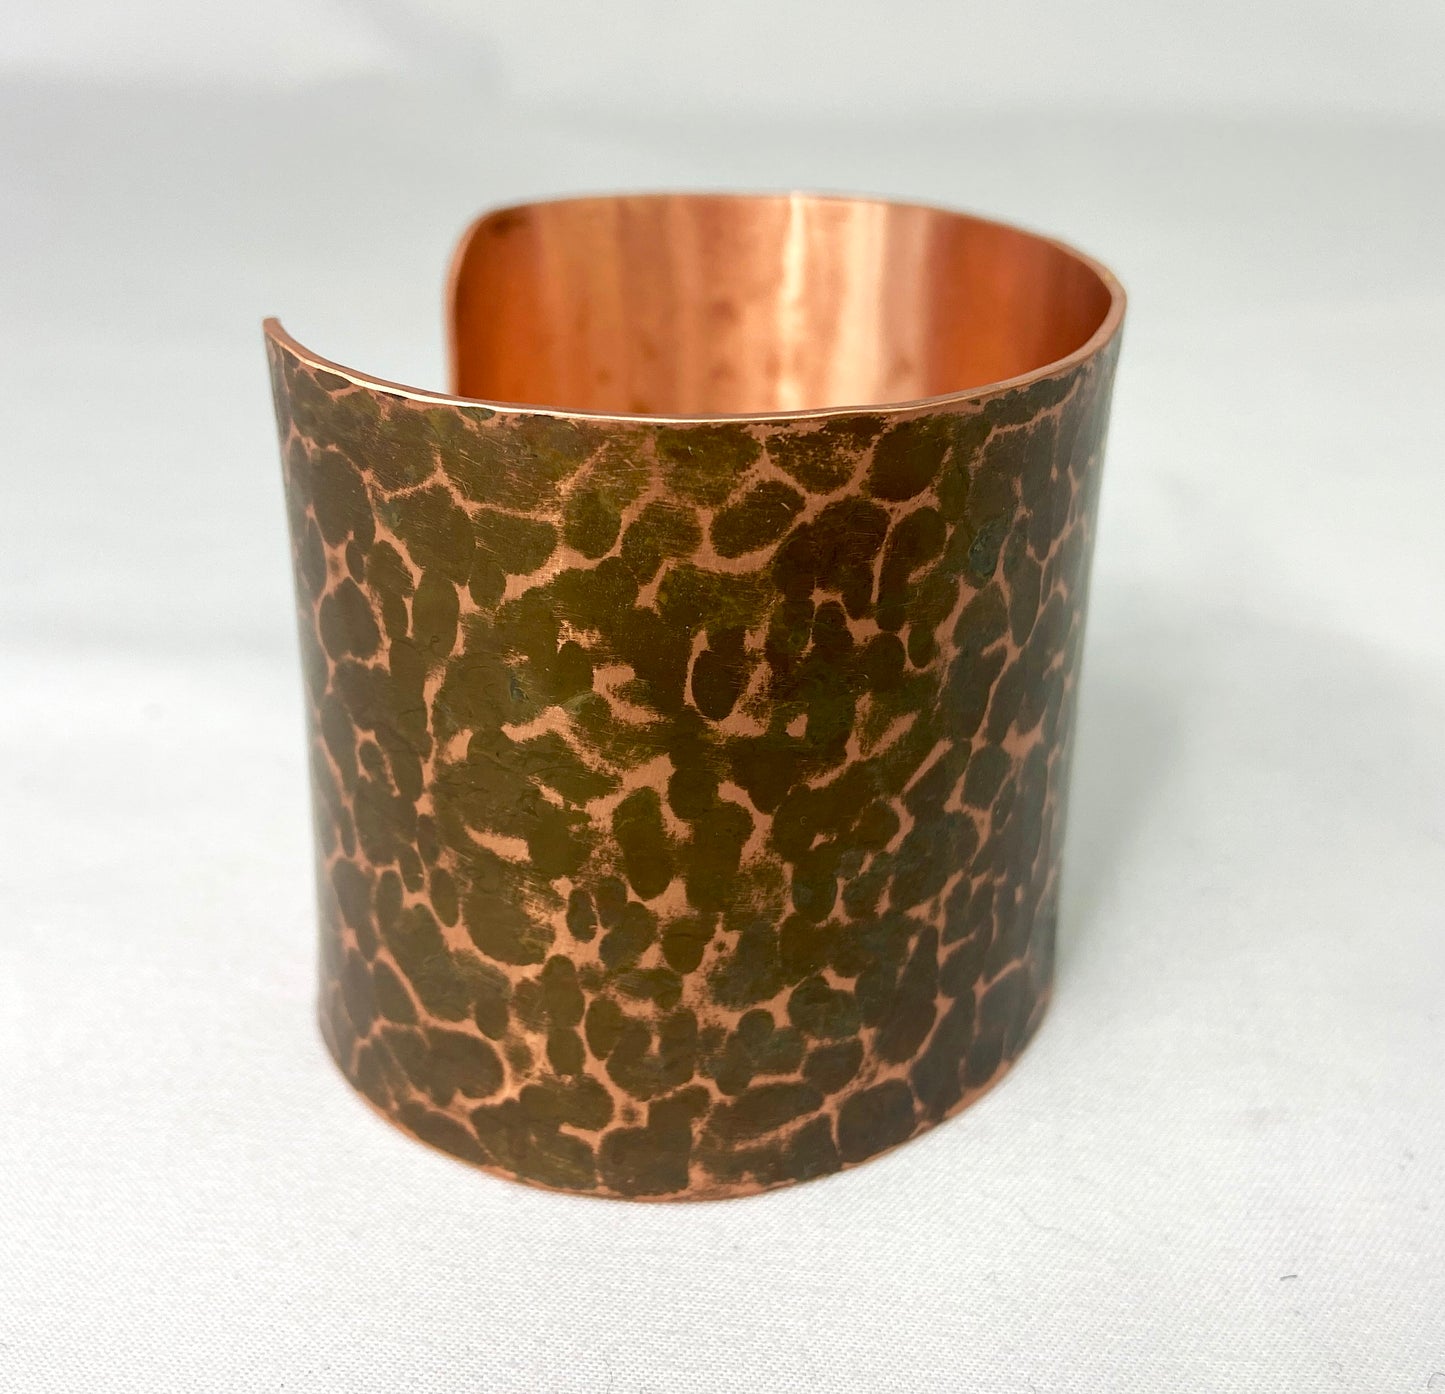 Hammered Copper Cuff Bracelet with Brown patina